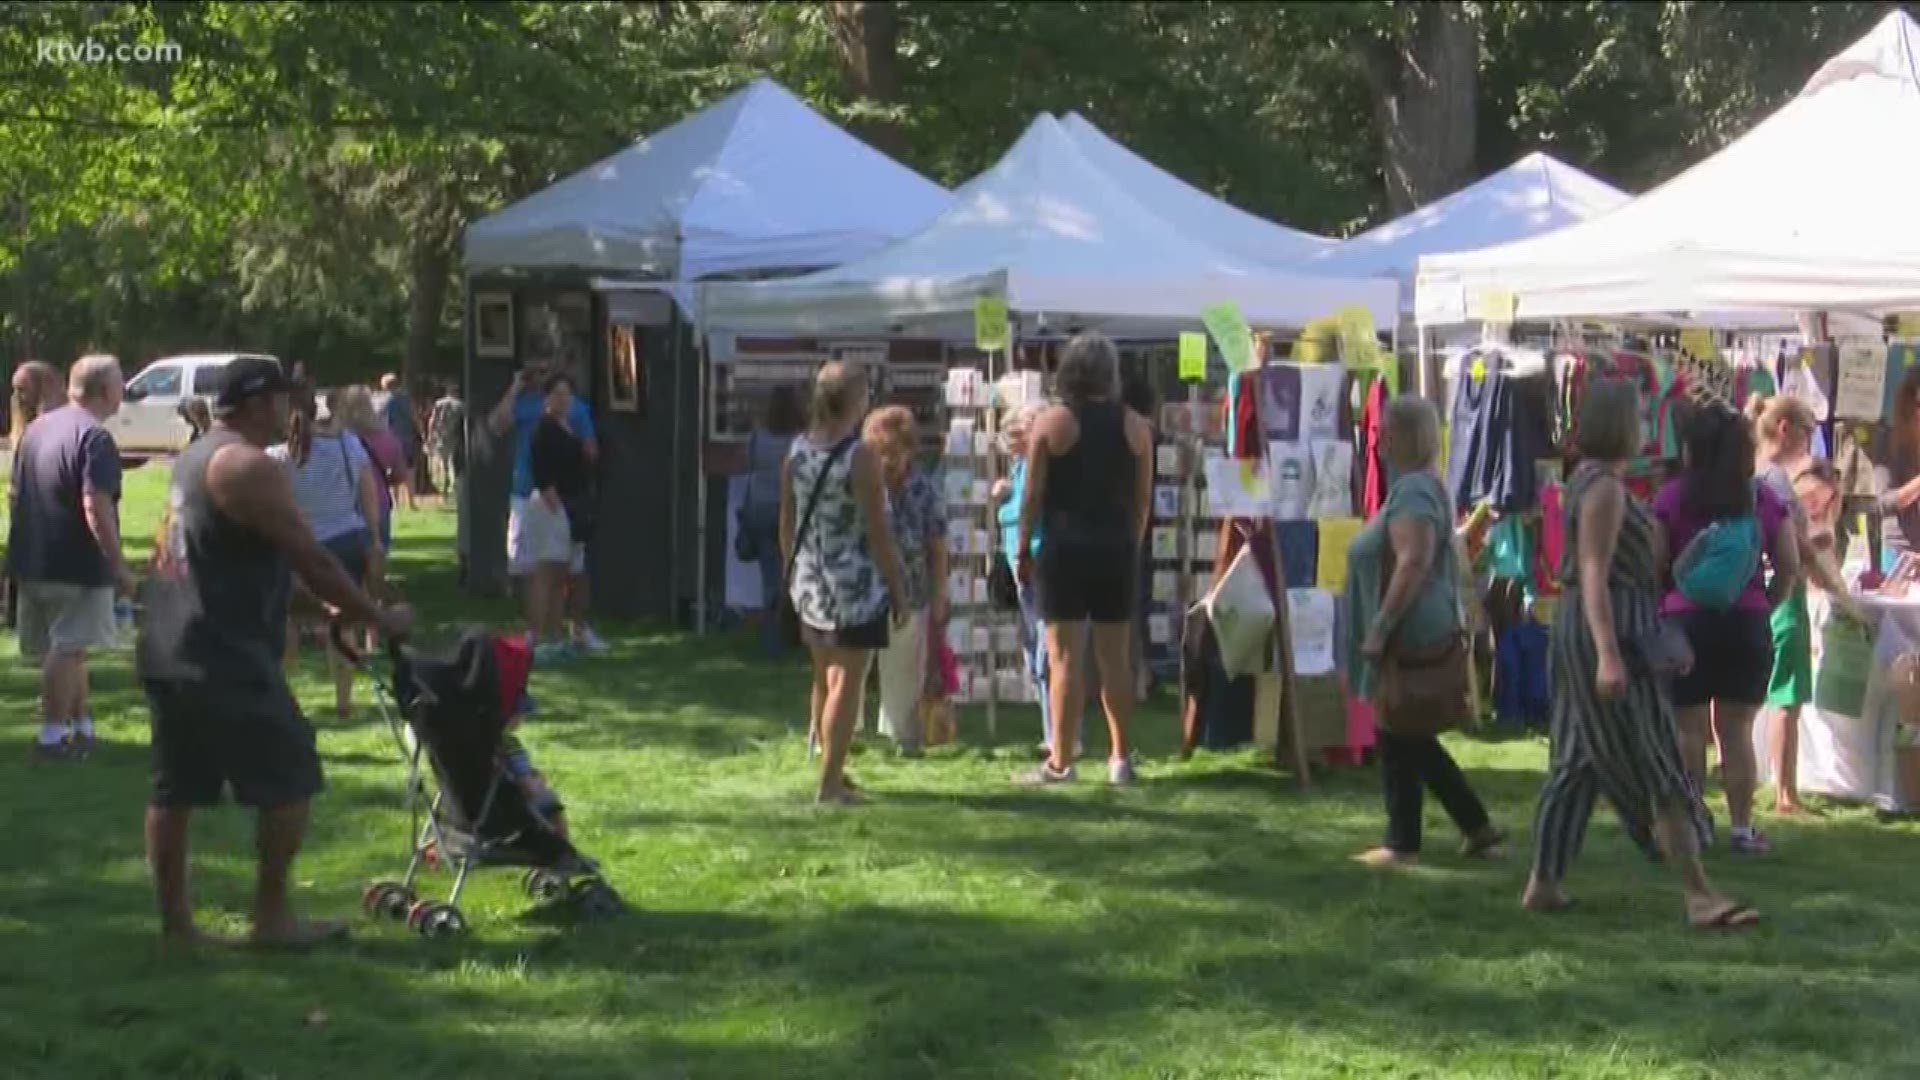 Art in the Park happening in Boise this weekend